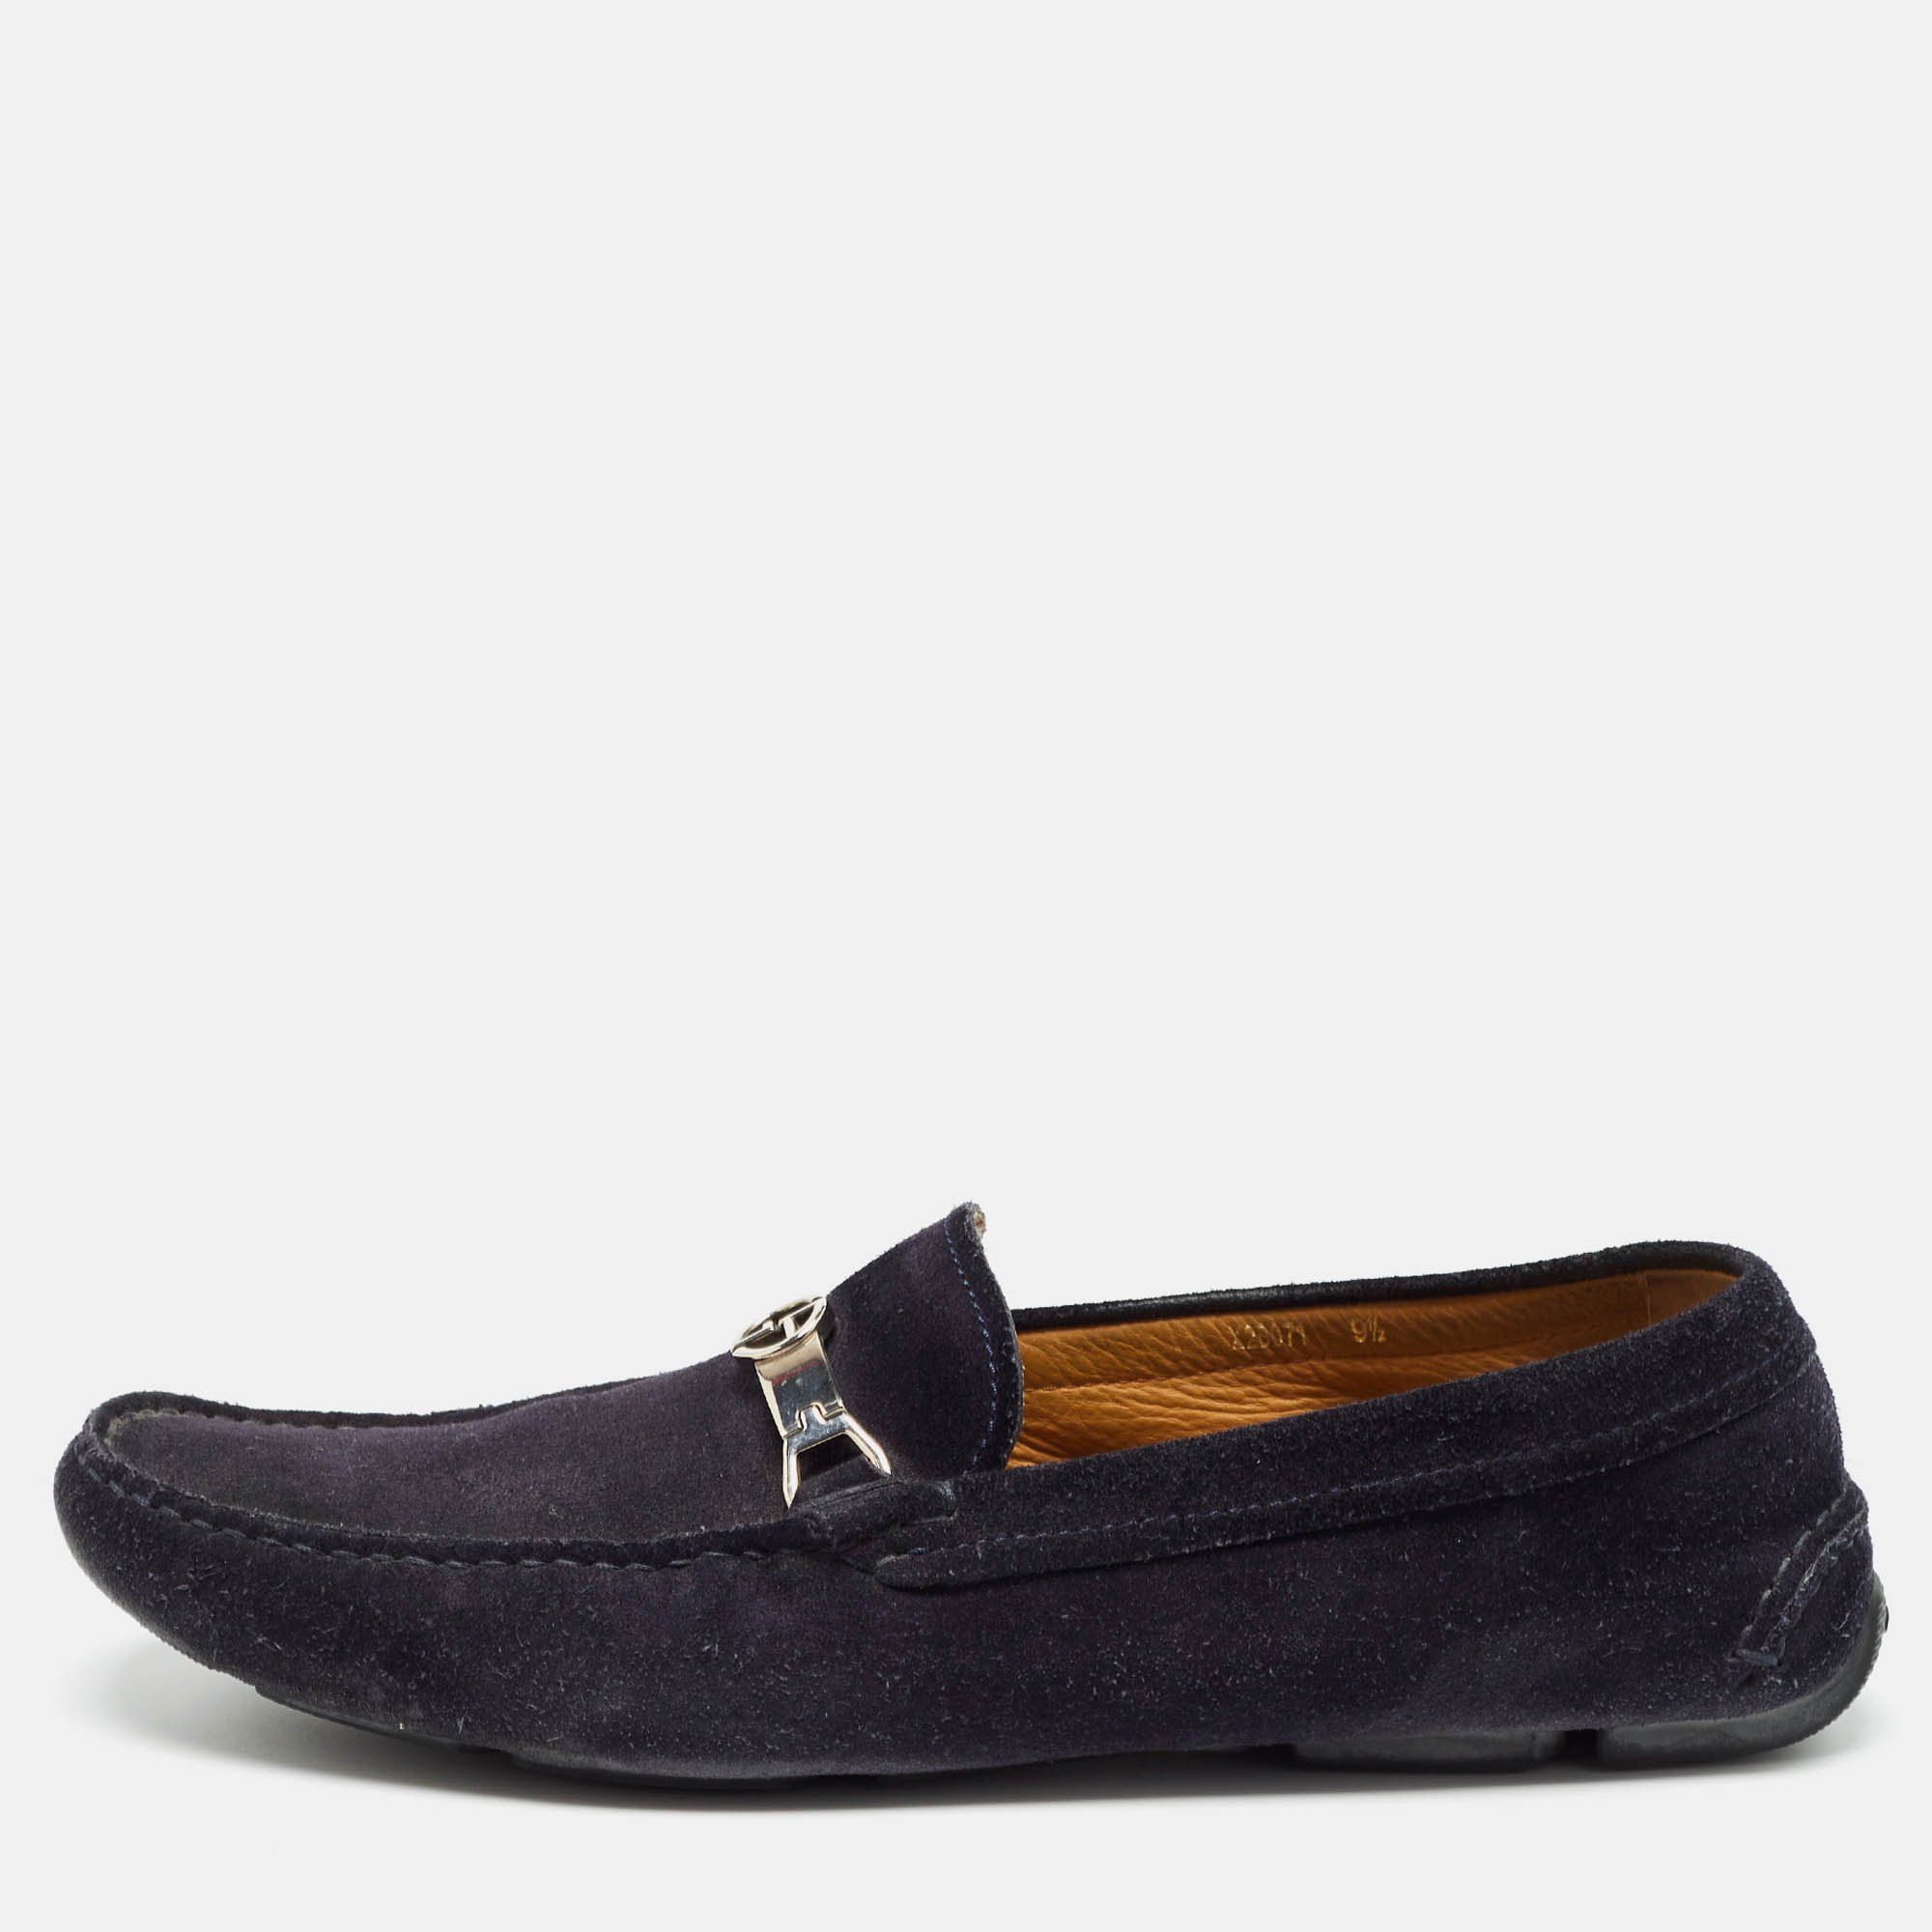 Pre-owned Giorgio Armani Navy Blue Suede Slip On Loafers Size 43.5